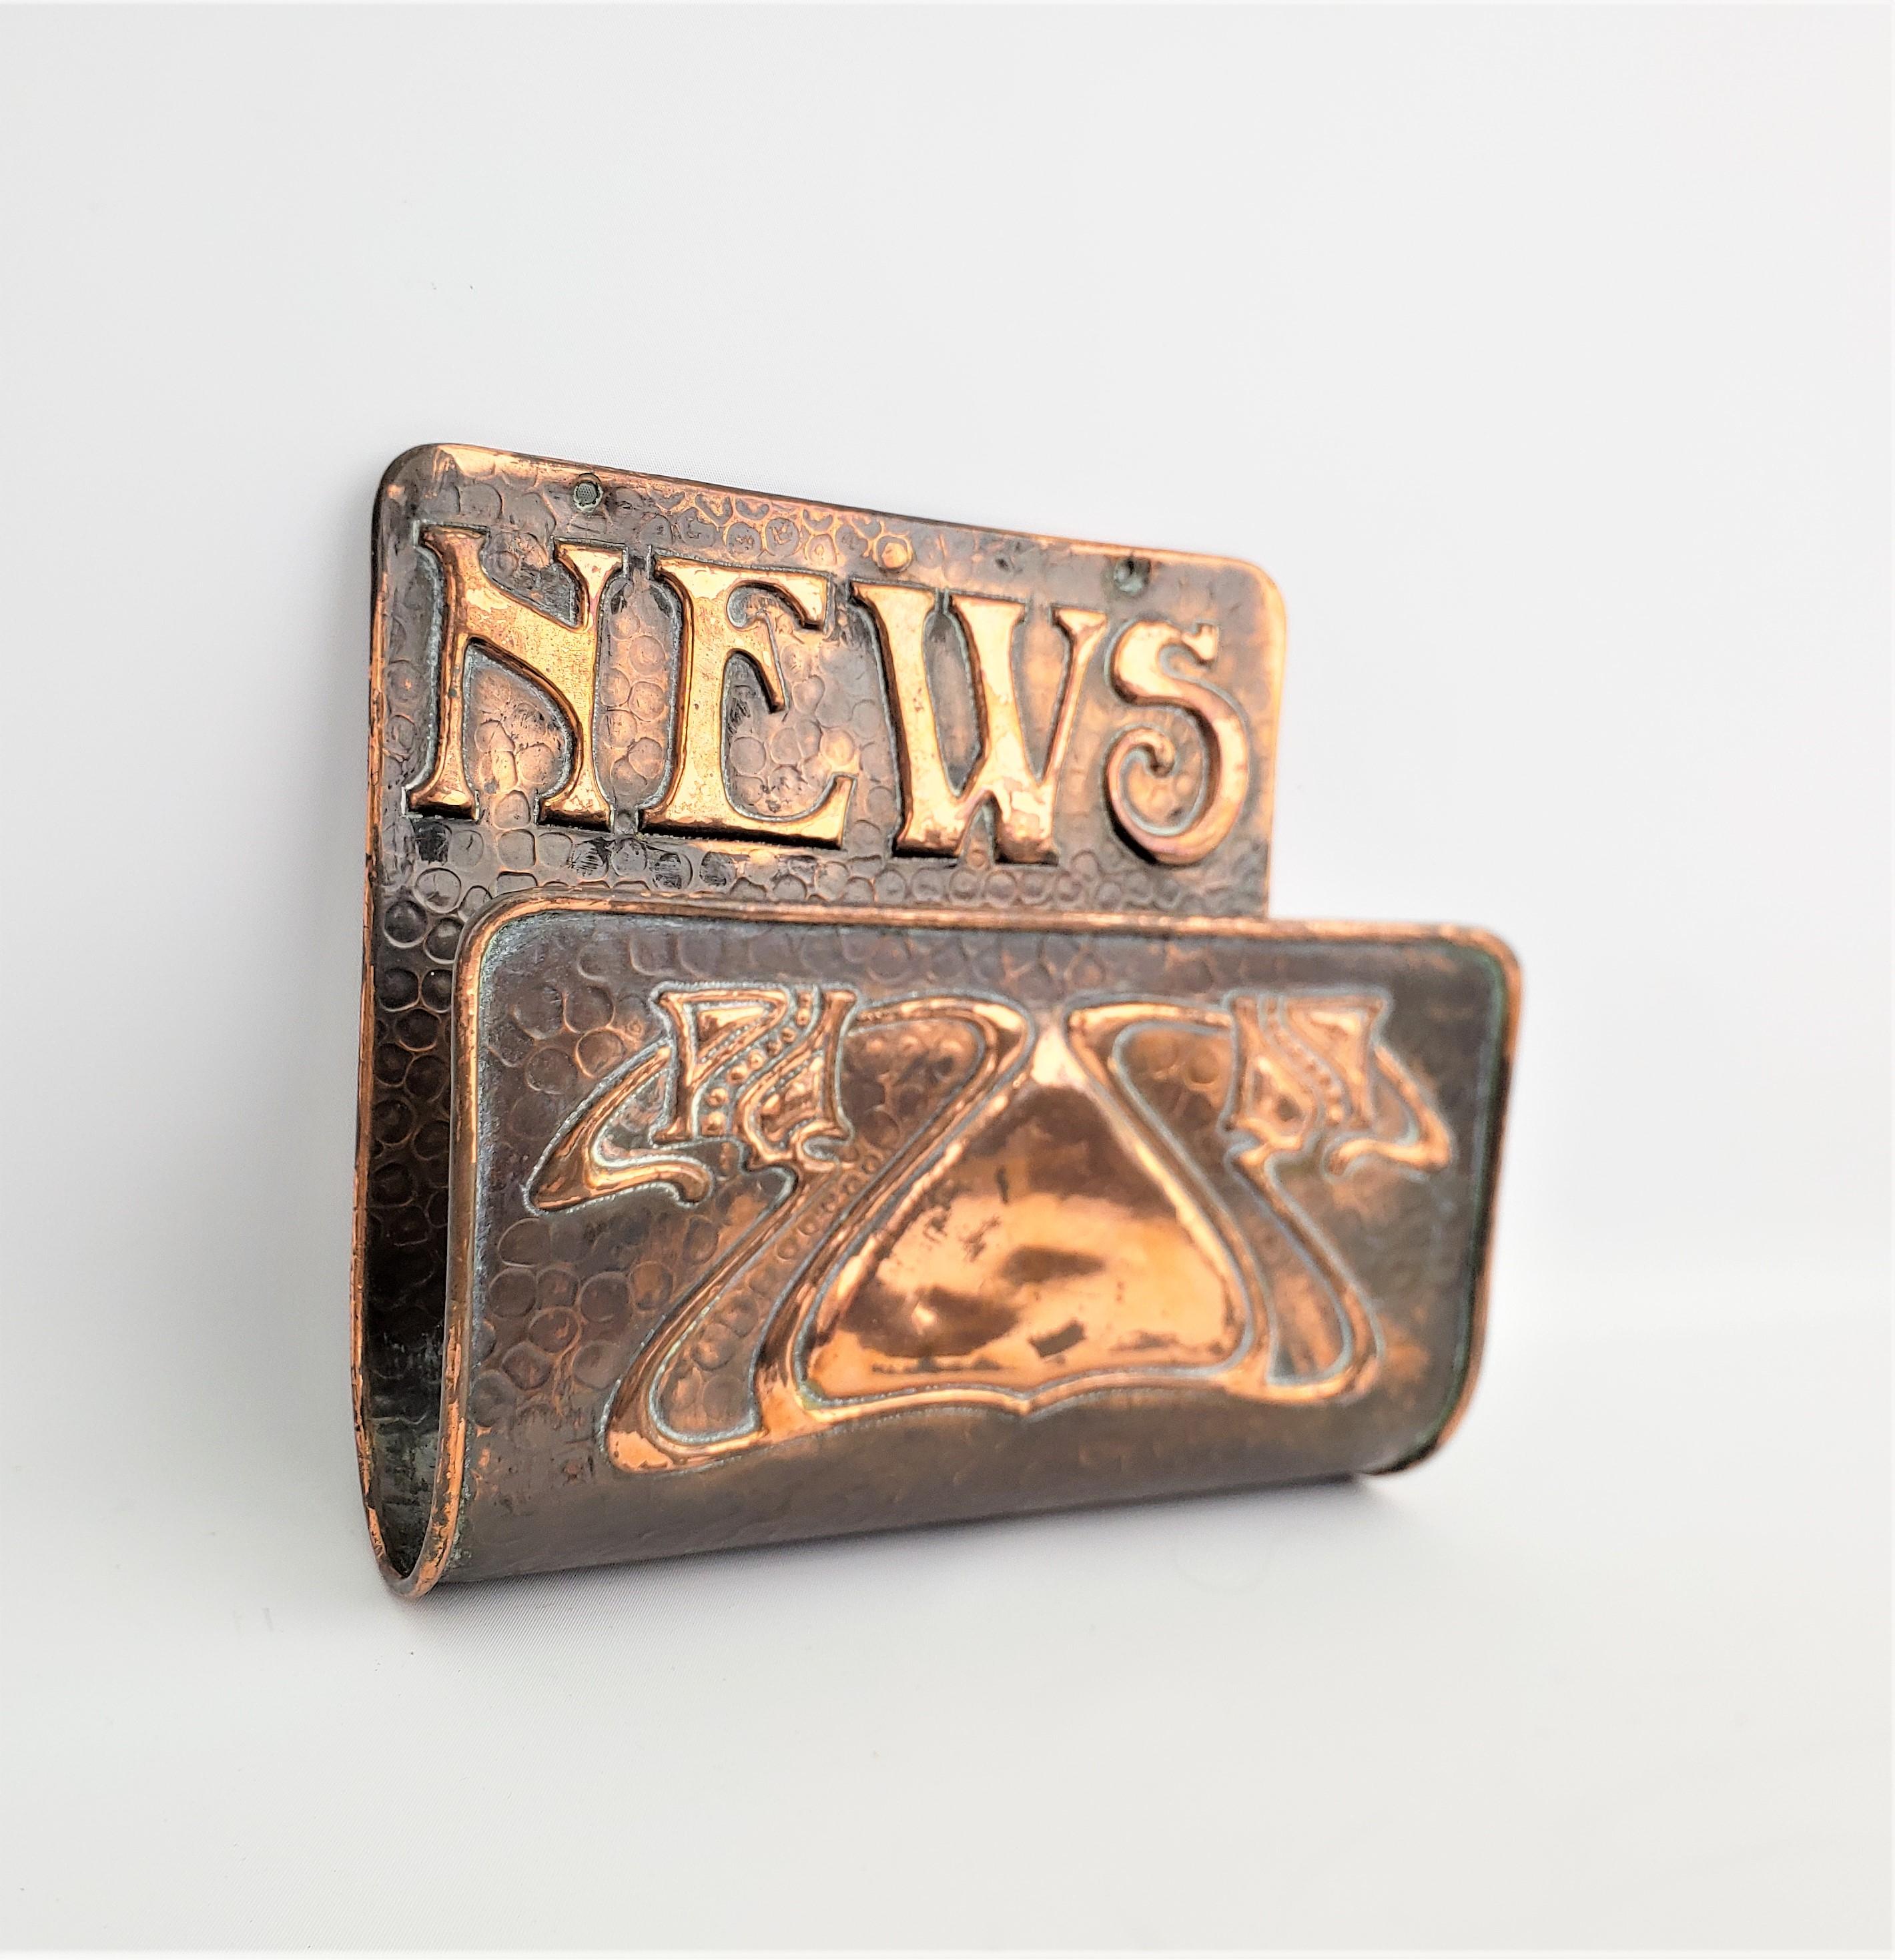 This hand hammered brass newspaper holder is unsigned, but presumed to have been made in the United States in approximately 1920 in an Arts & Crafts style. The rack or holder is constructed of solid brass and has raised letters across the top 